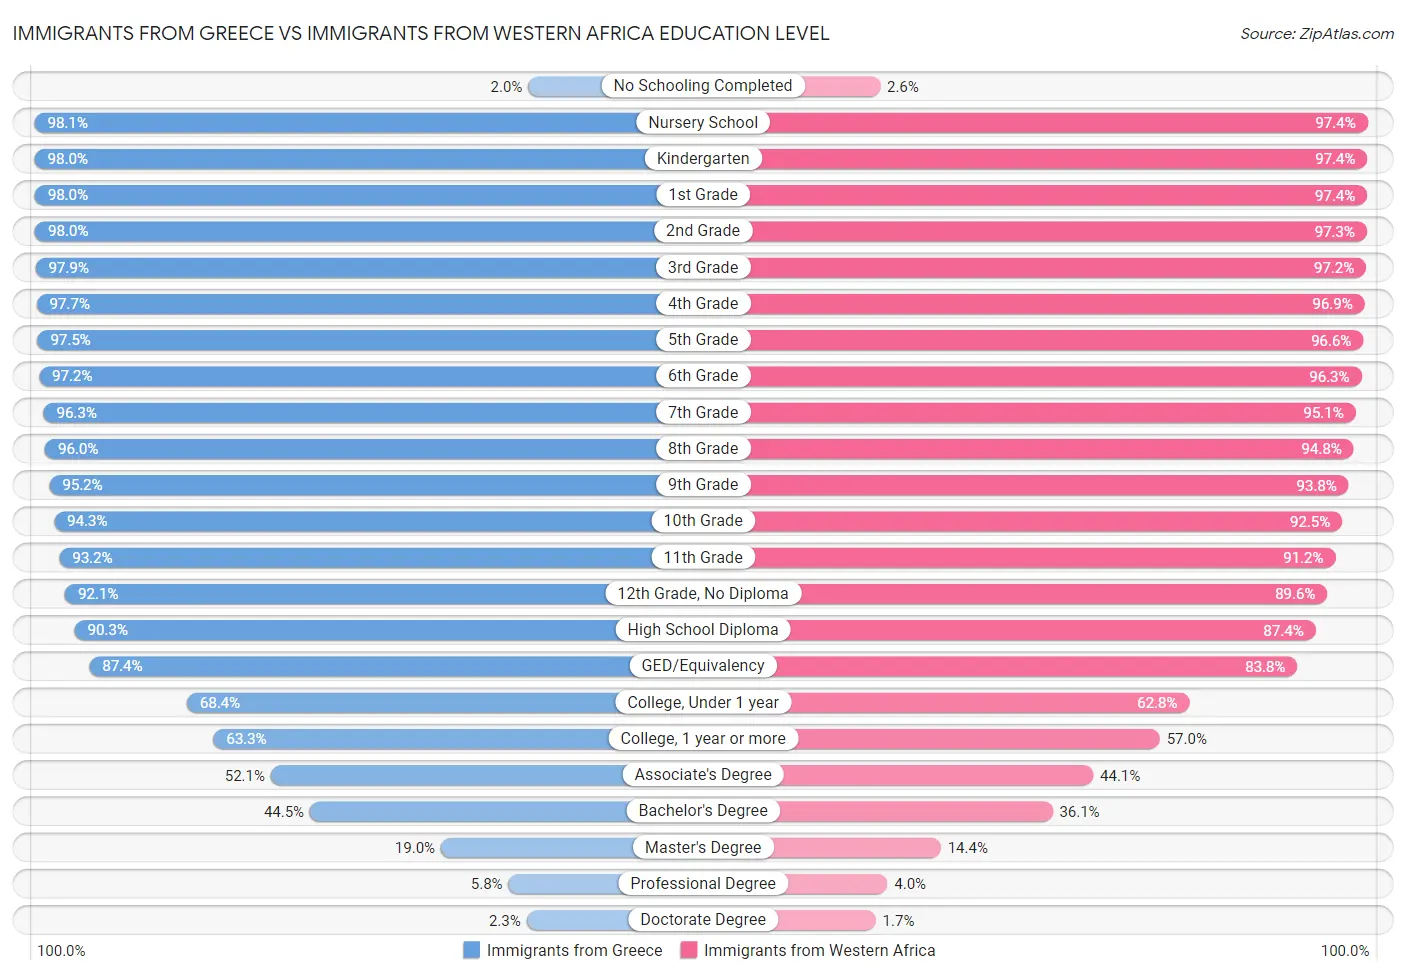 Immigrants from Greece vs Immigrants from Western Africa Education Level